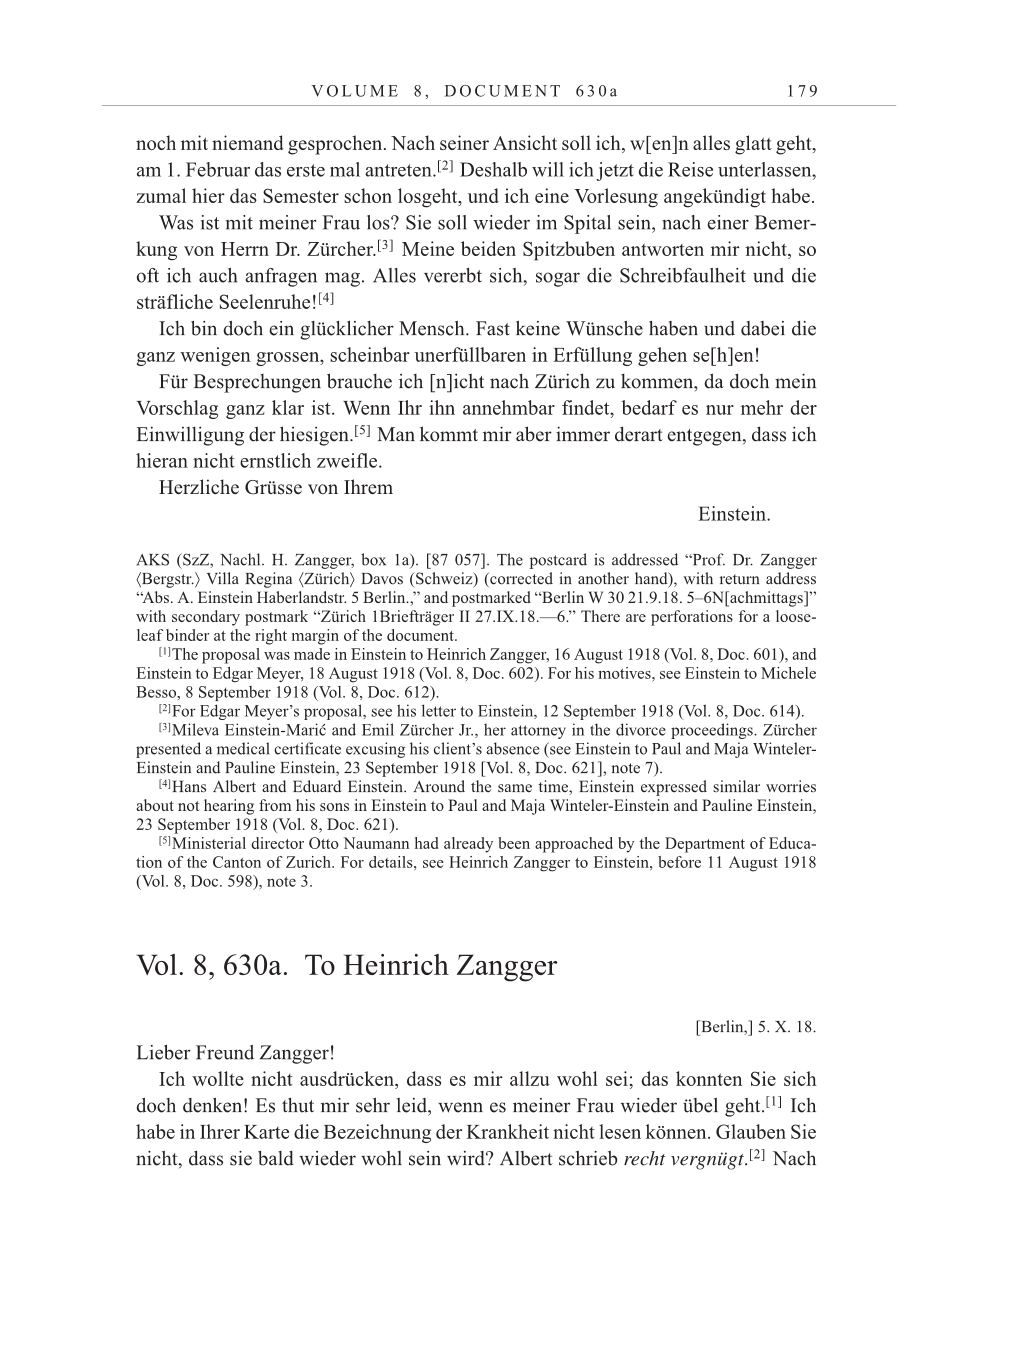 Volume 10: The Berlin Years: Correspondence May-December 1920 / Supplementary Correspondence 1909-1920 page 179